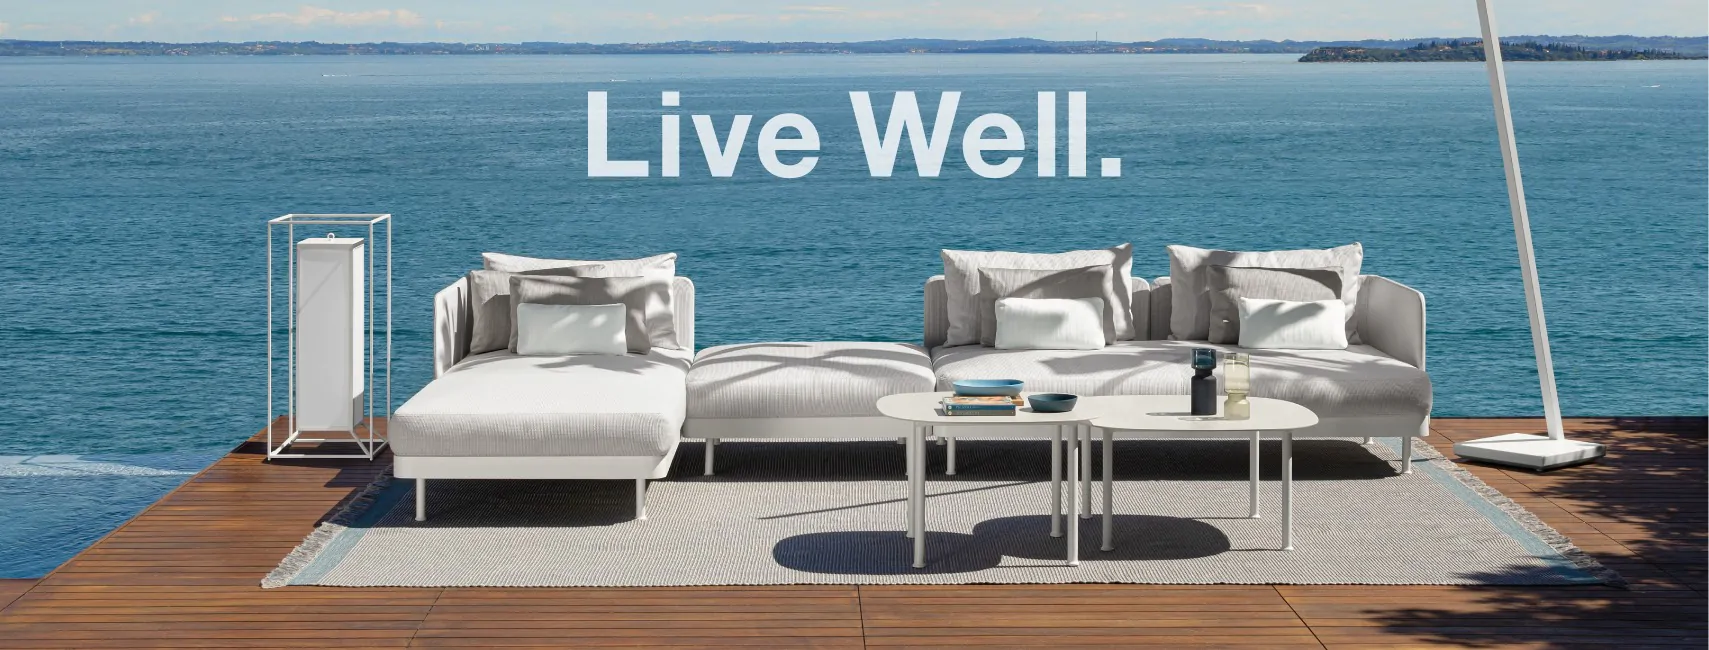 Live Well With Sanipex Group